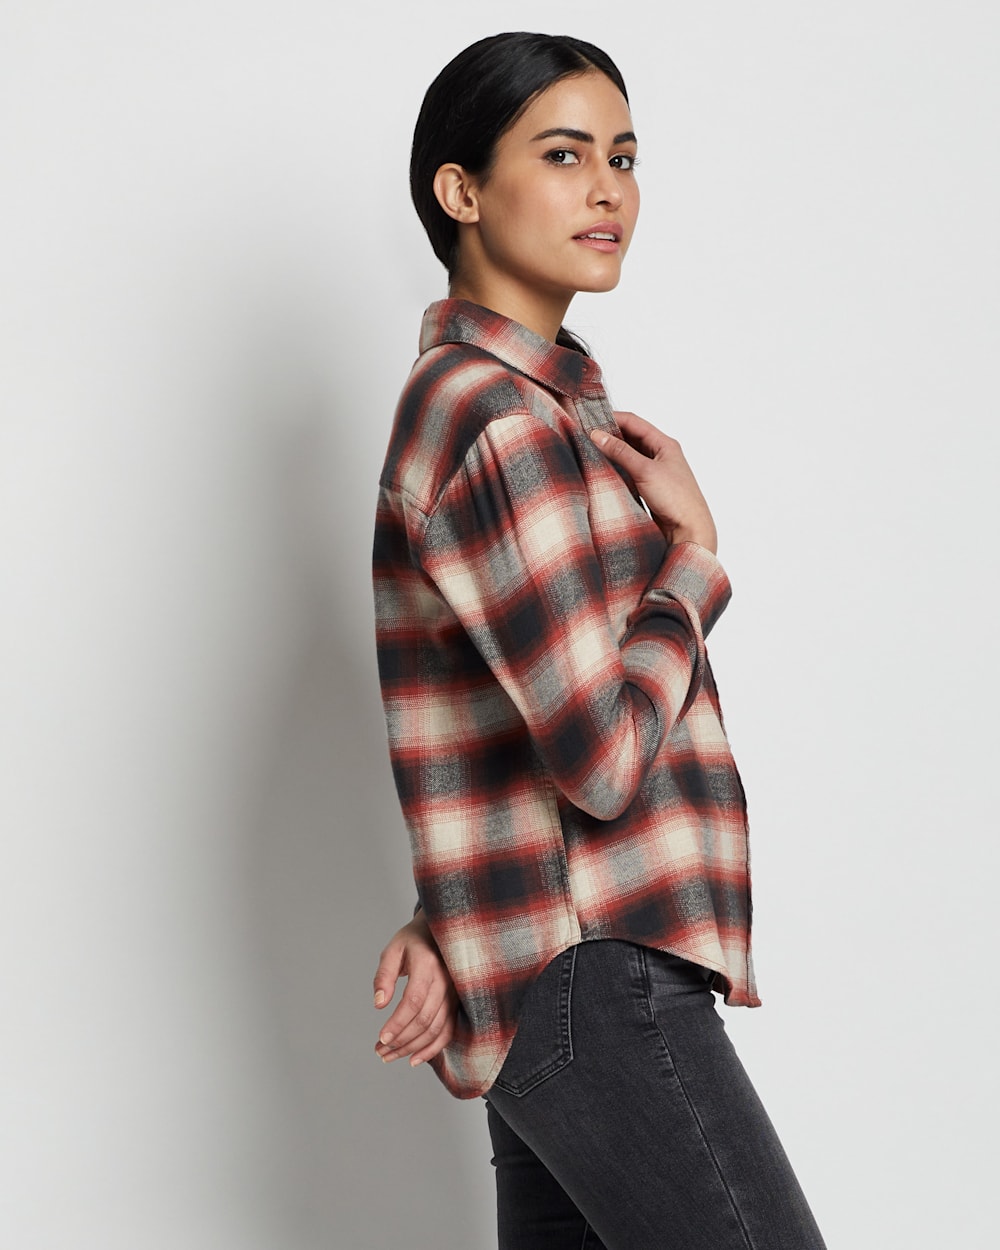 ALTERNATE VIEW OF WOMEN'S BOYFRIEND DOUBLEBRUSHED FLANNEL SHIRT IN RED/CHARCOAL PLAID image number 2